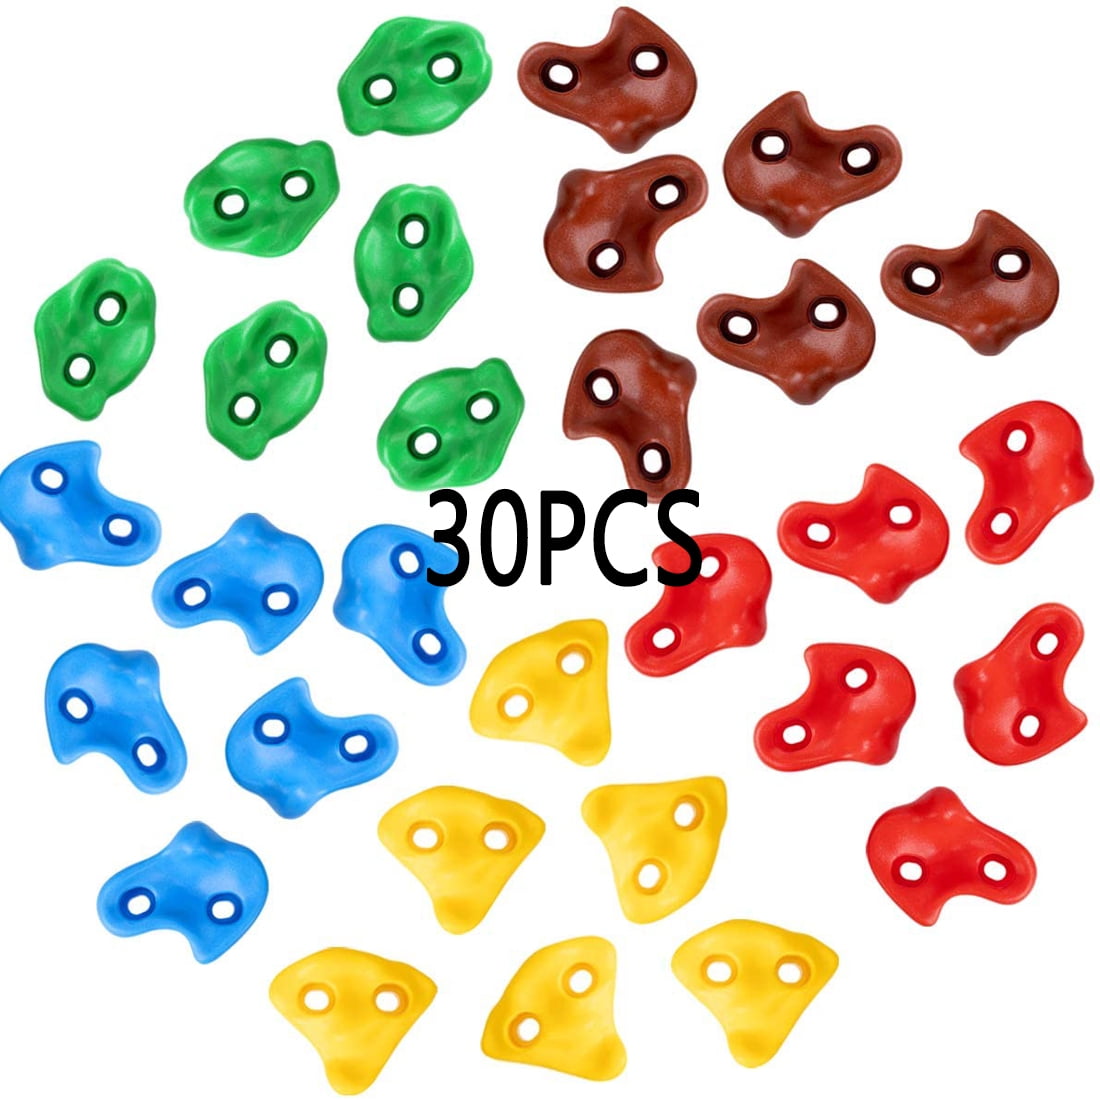 30Pcs Climbing Grips Holds Rock Wall Stones In/Outdoor Kids Playground Mix-color 